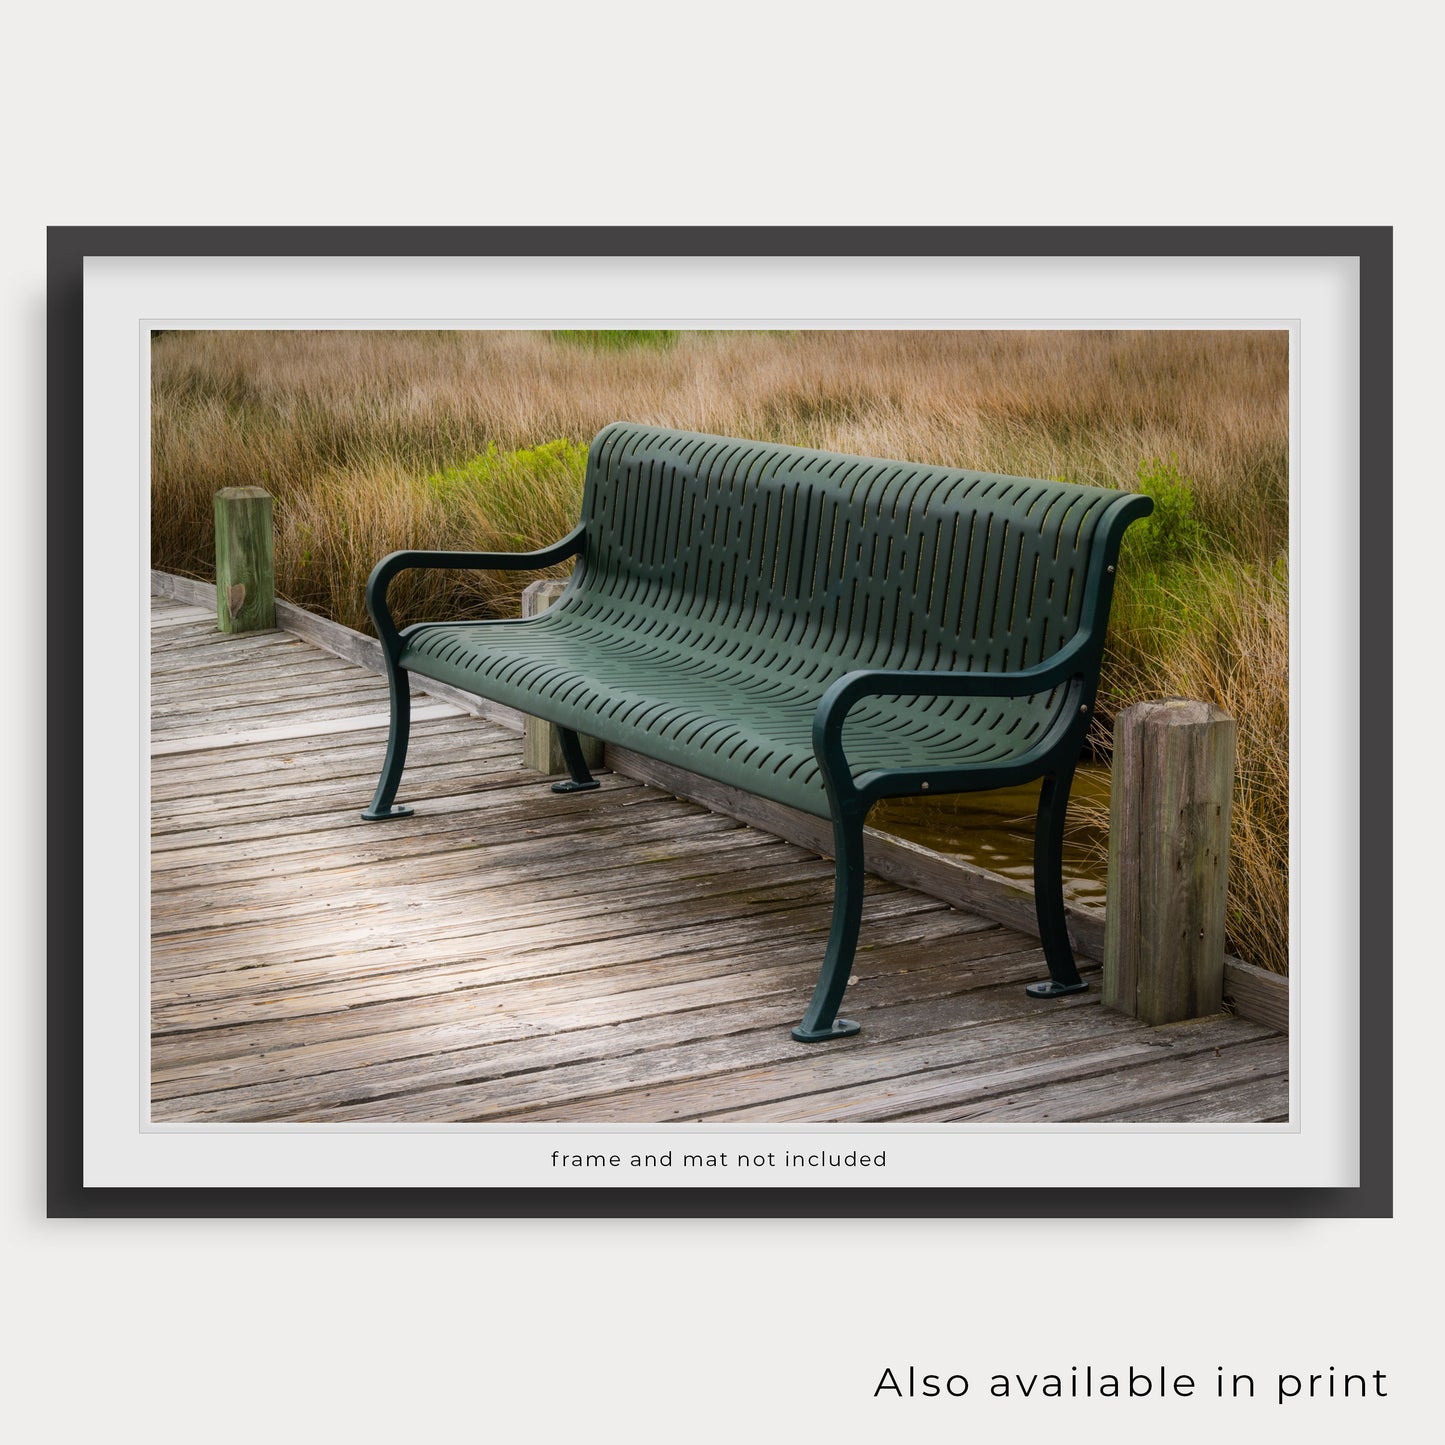 The photograph is beautifully presented as a framed print, showing this photograph is also available as a paper print. Please note that the frame and mat shown are for display purposes only and are not included in the purchase.